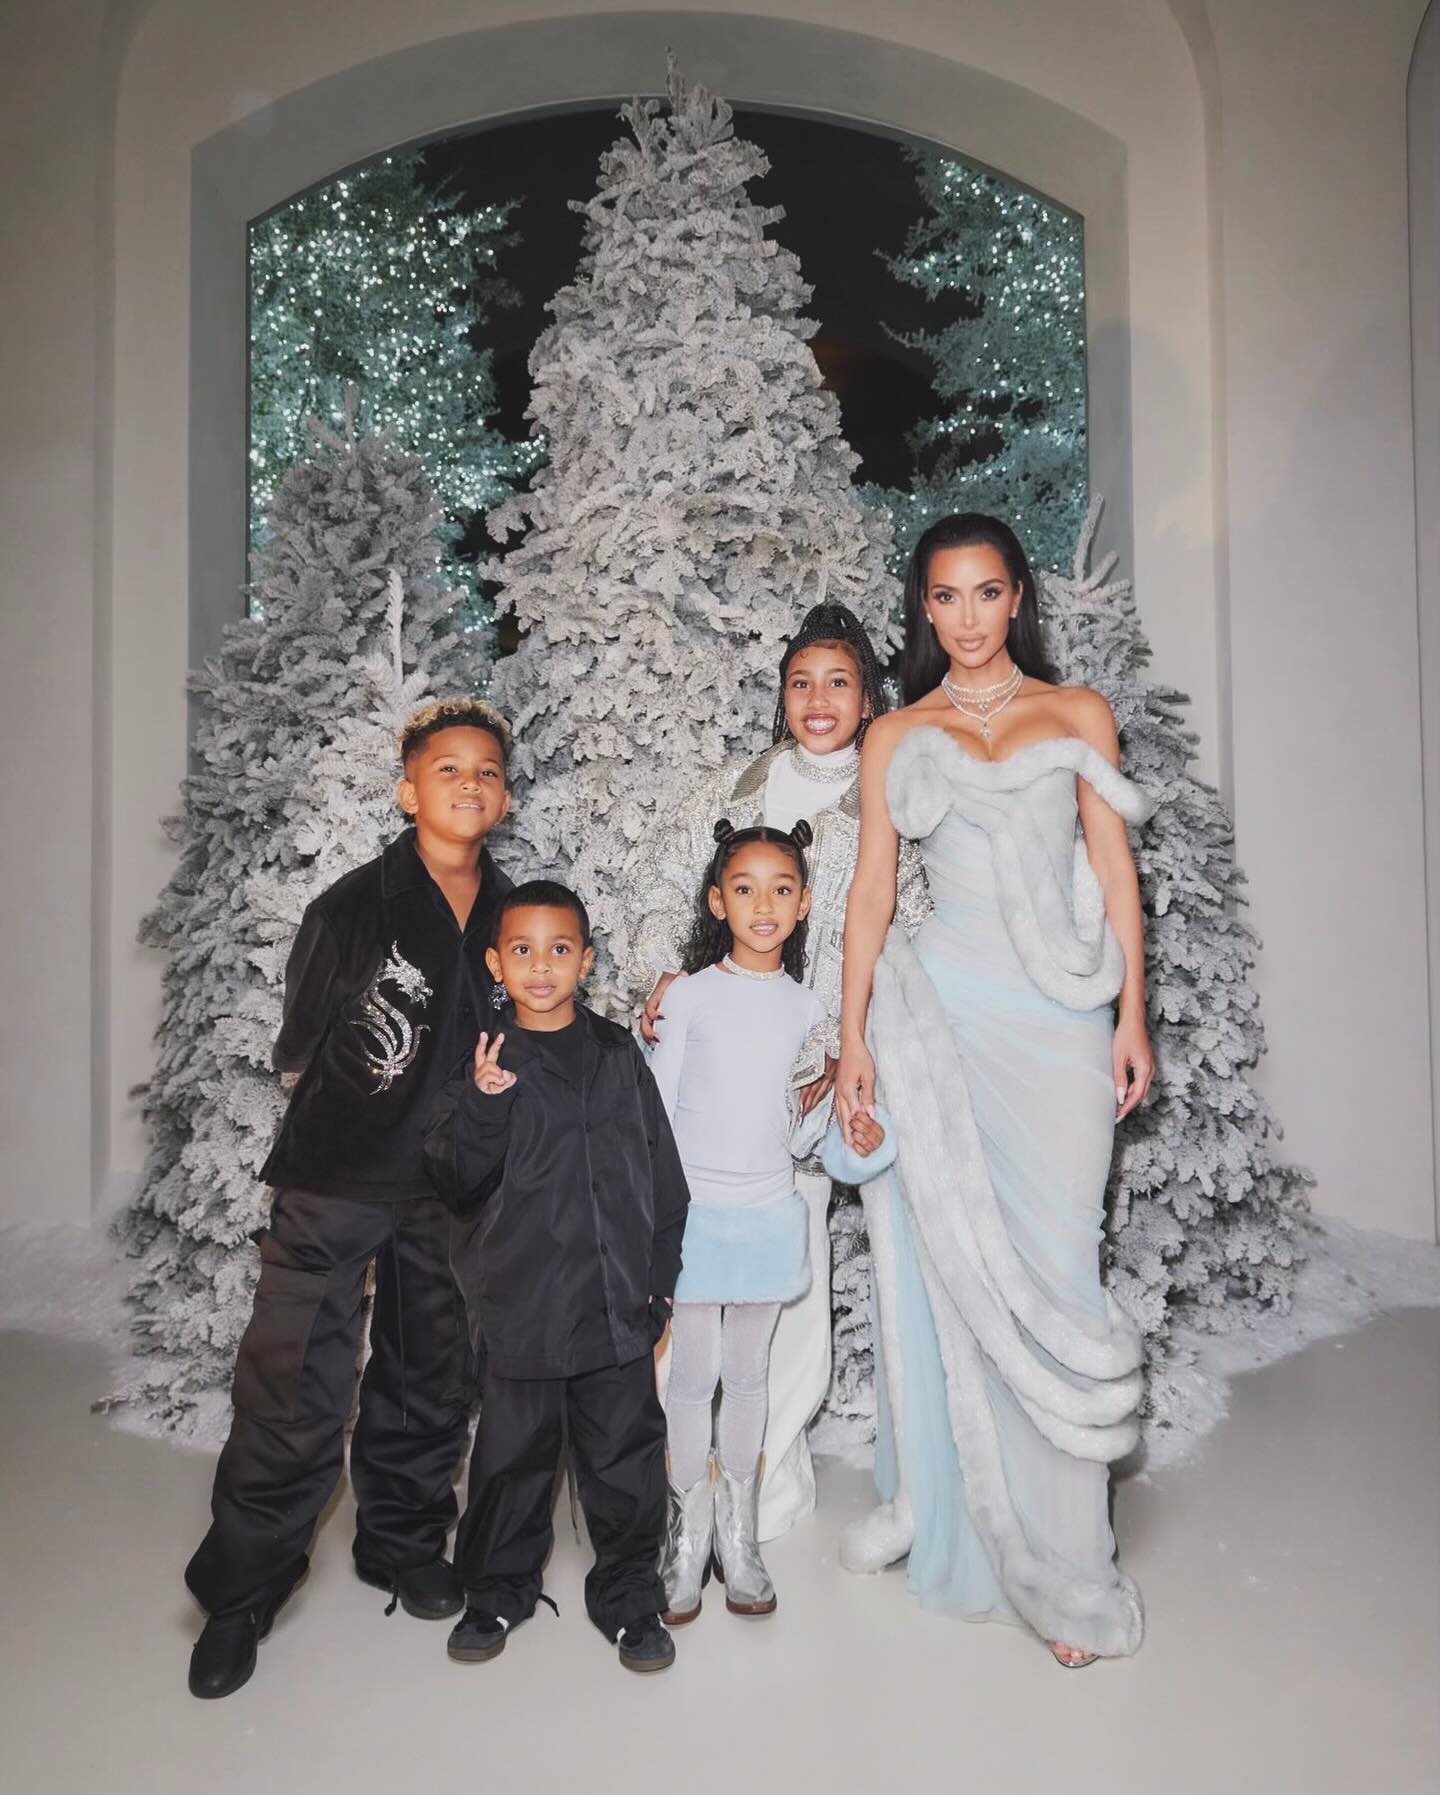 Chicago West with his mom, Kim Kardashian, and her three siblings